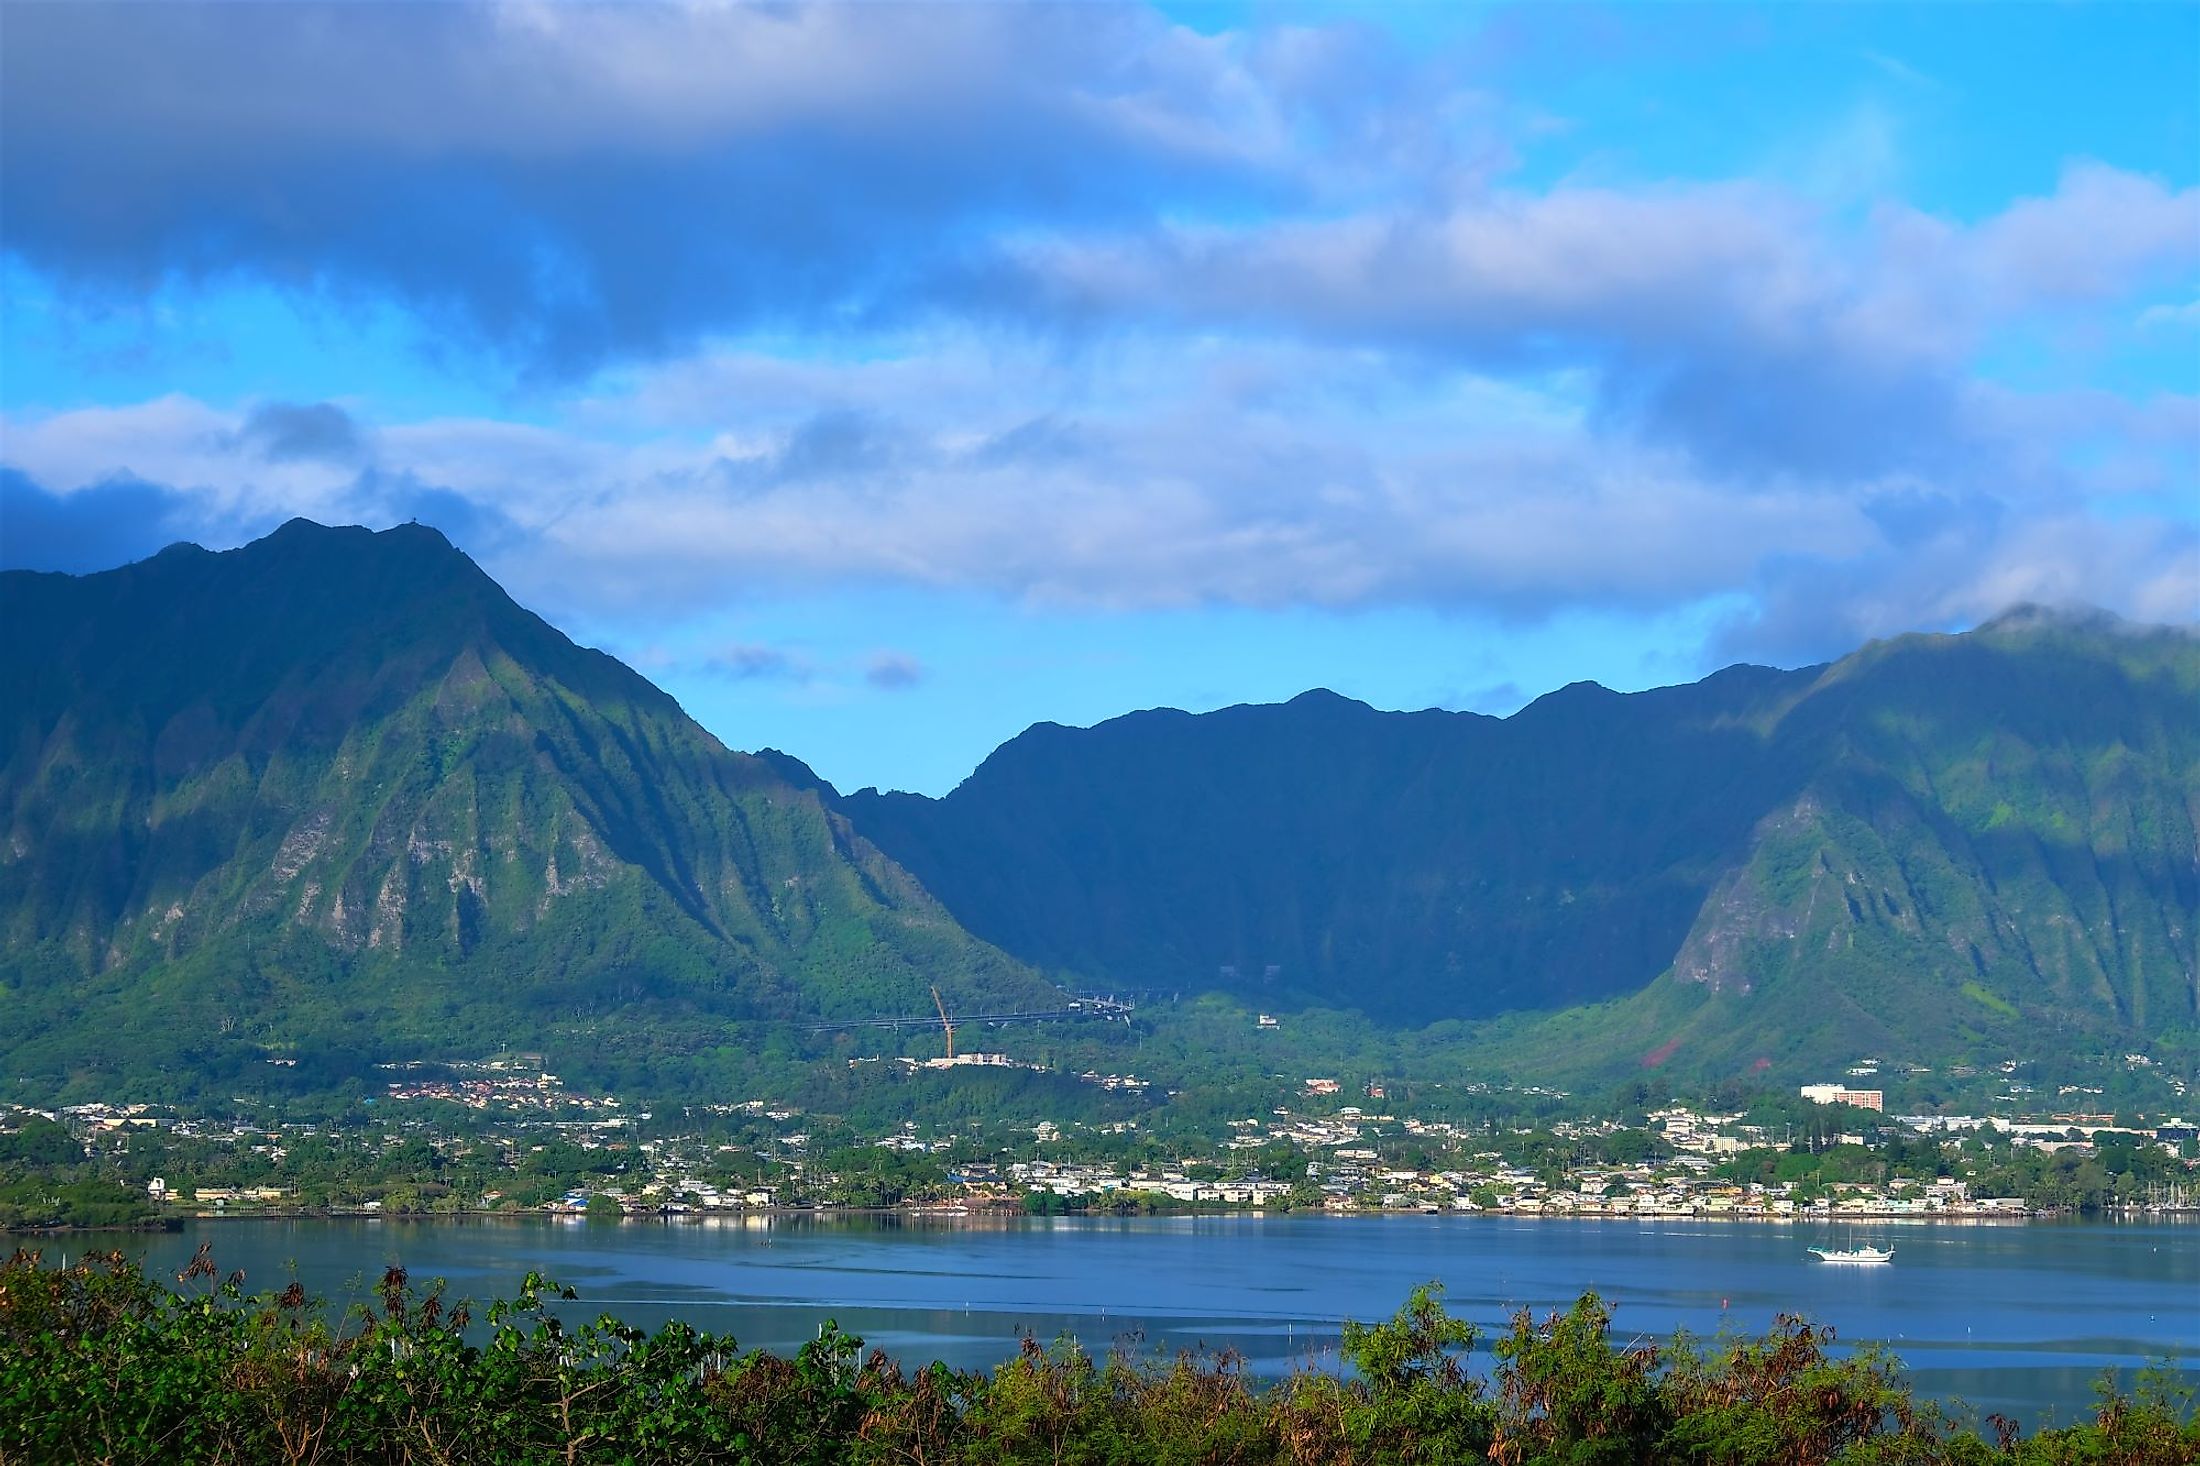 Town of Kaneohe, Oahu, Hawaii as seen from across the Kaneohe Bay. 